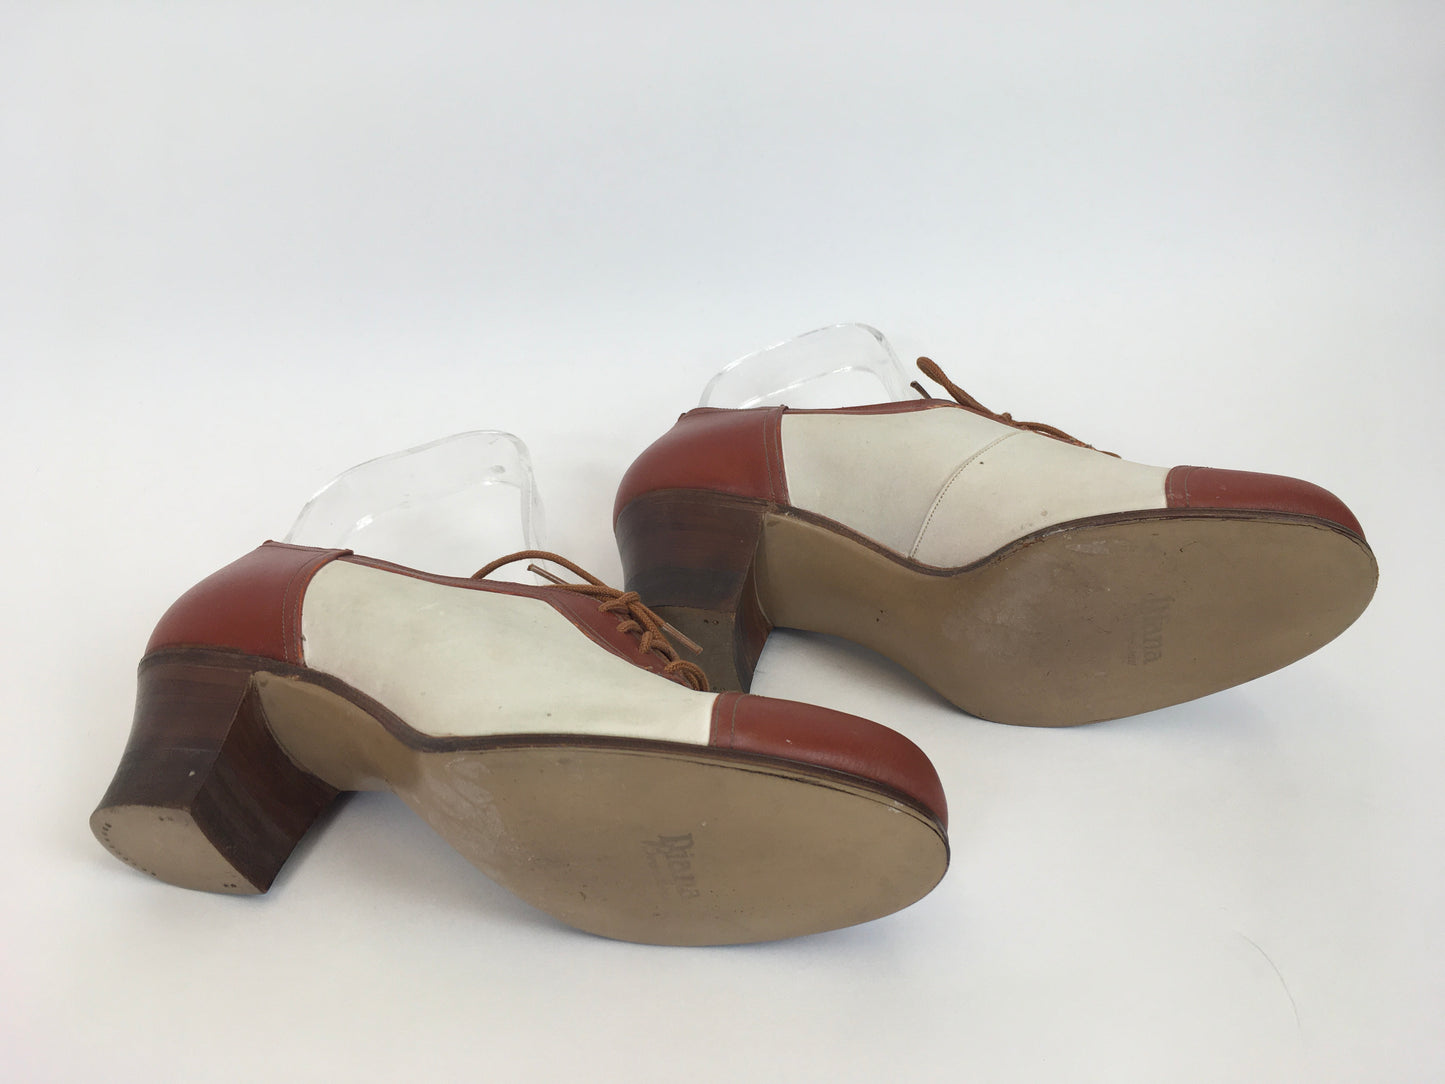 Original 1940’s CC41 ‘ Diana’ Suede & Leather Heels - A Stunning Example From The Era